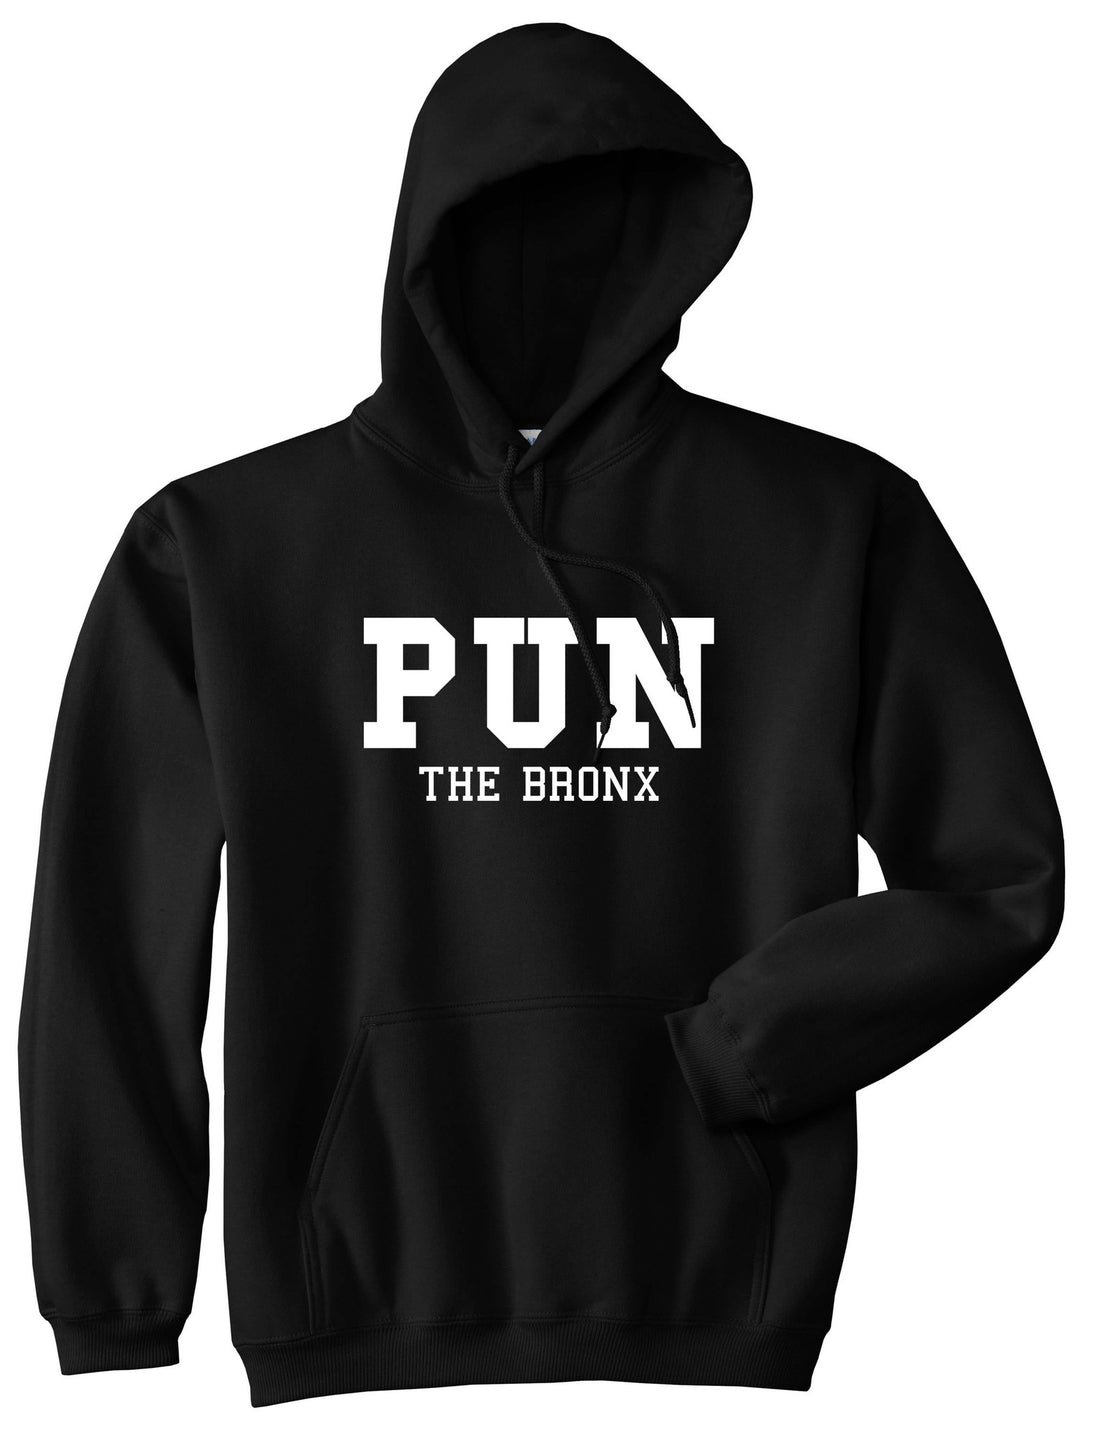 Pun The Bronx Pullover Hoodie Hoody in Black by Kings Of NY